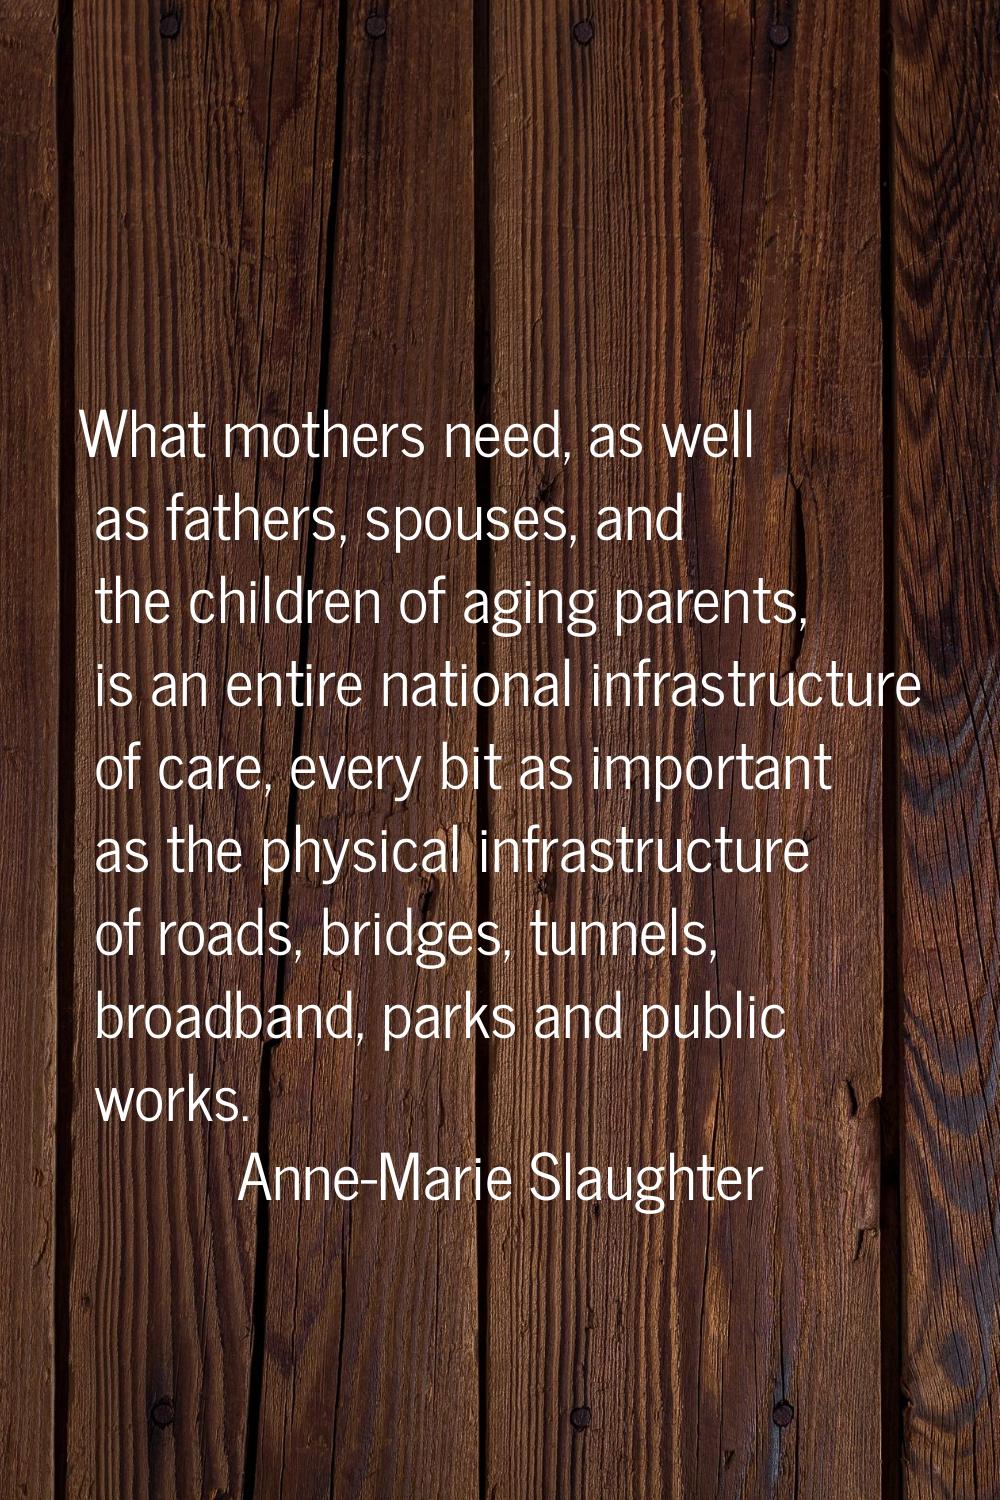 What mothers need, as well as fathers, spouses, and the children of aging parents, is an entire nat